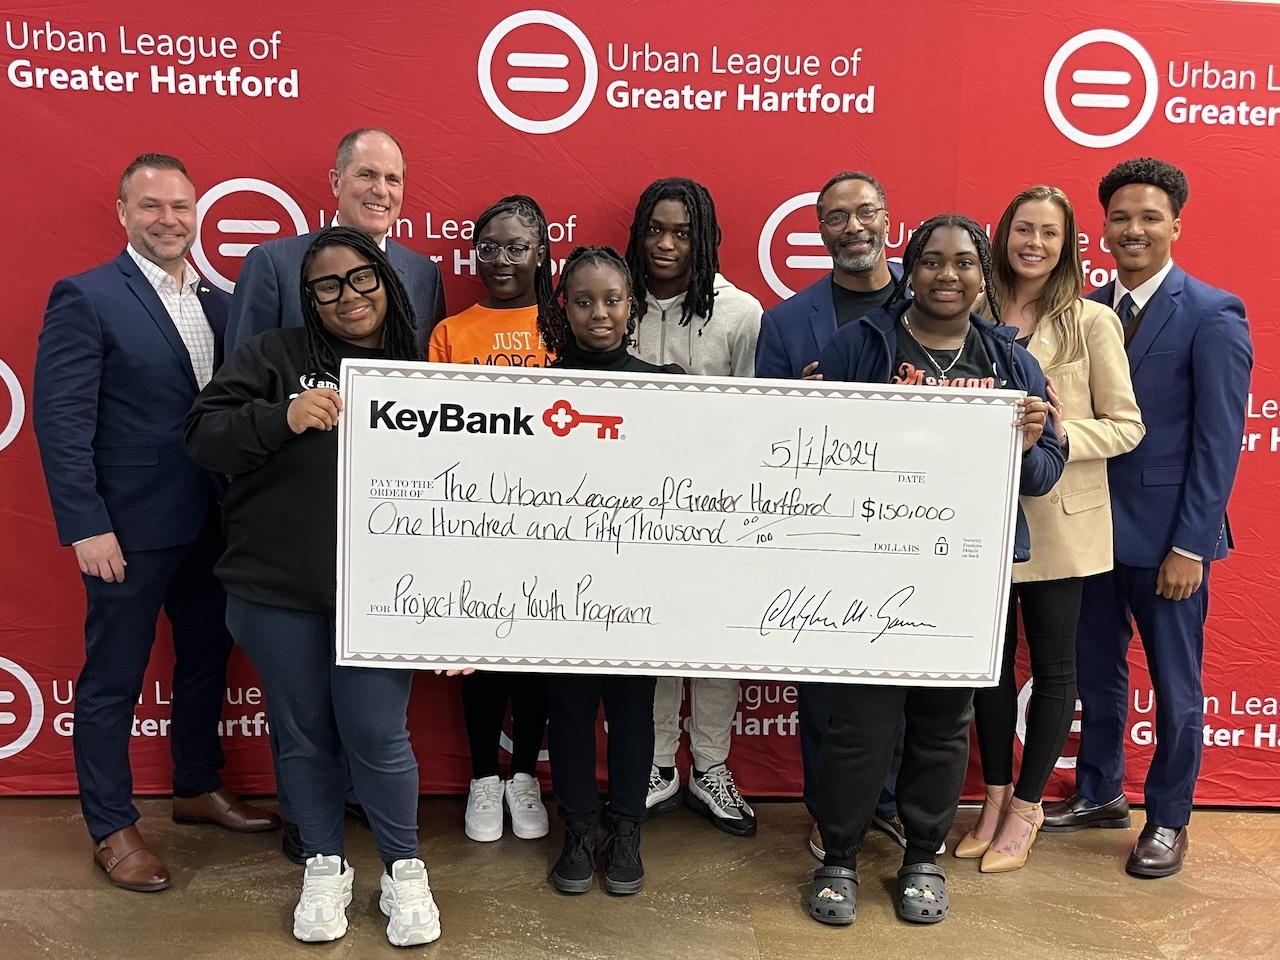 Check presentation with the Urban League of Greater Hartford and KeyBank.